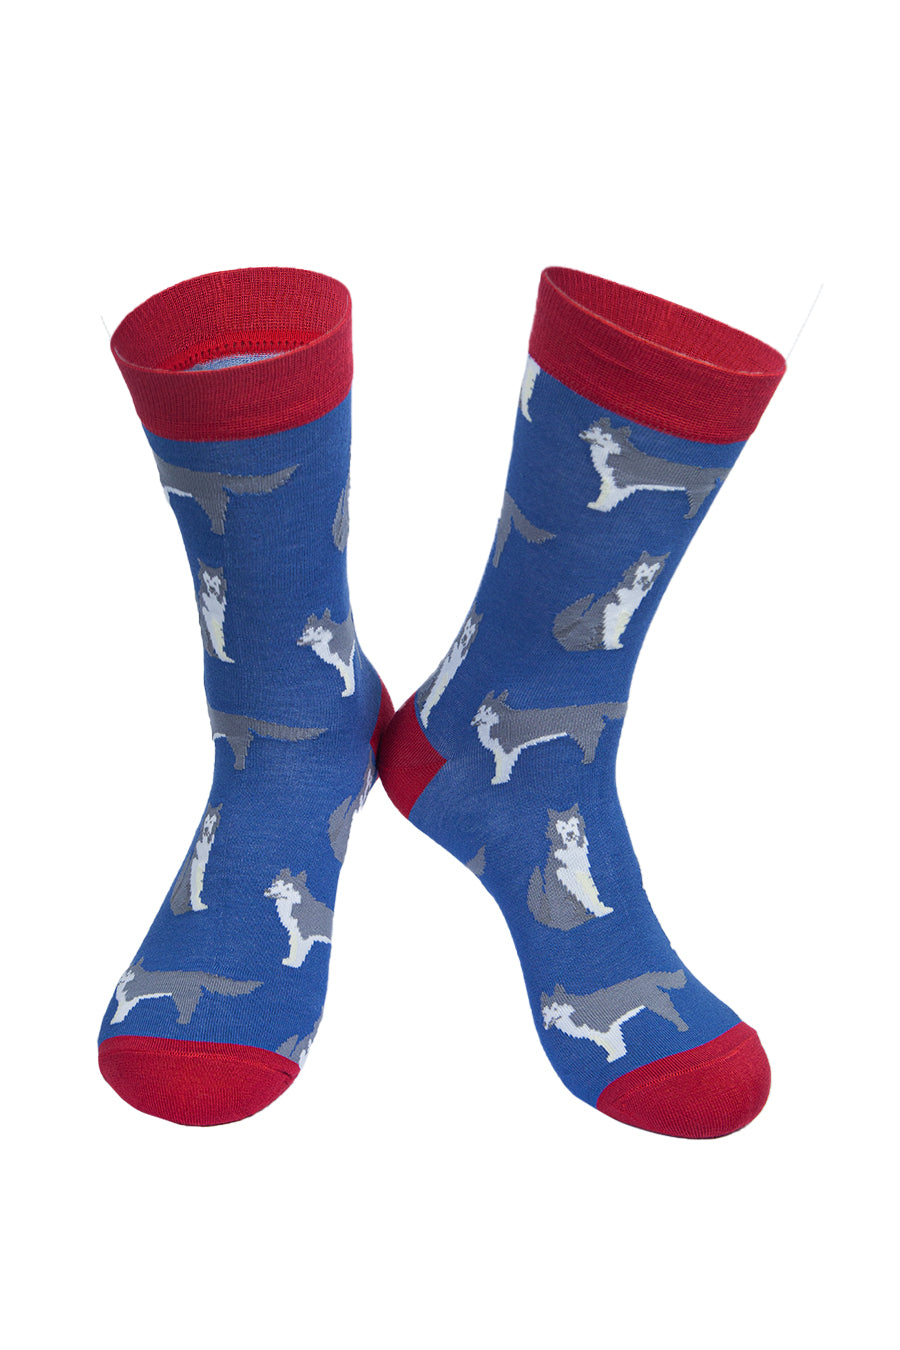 blue socks with a red heel, toe and cuff with an all over pattern of husky dogs